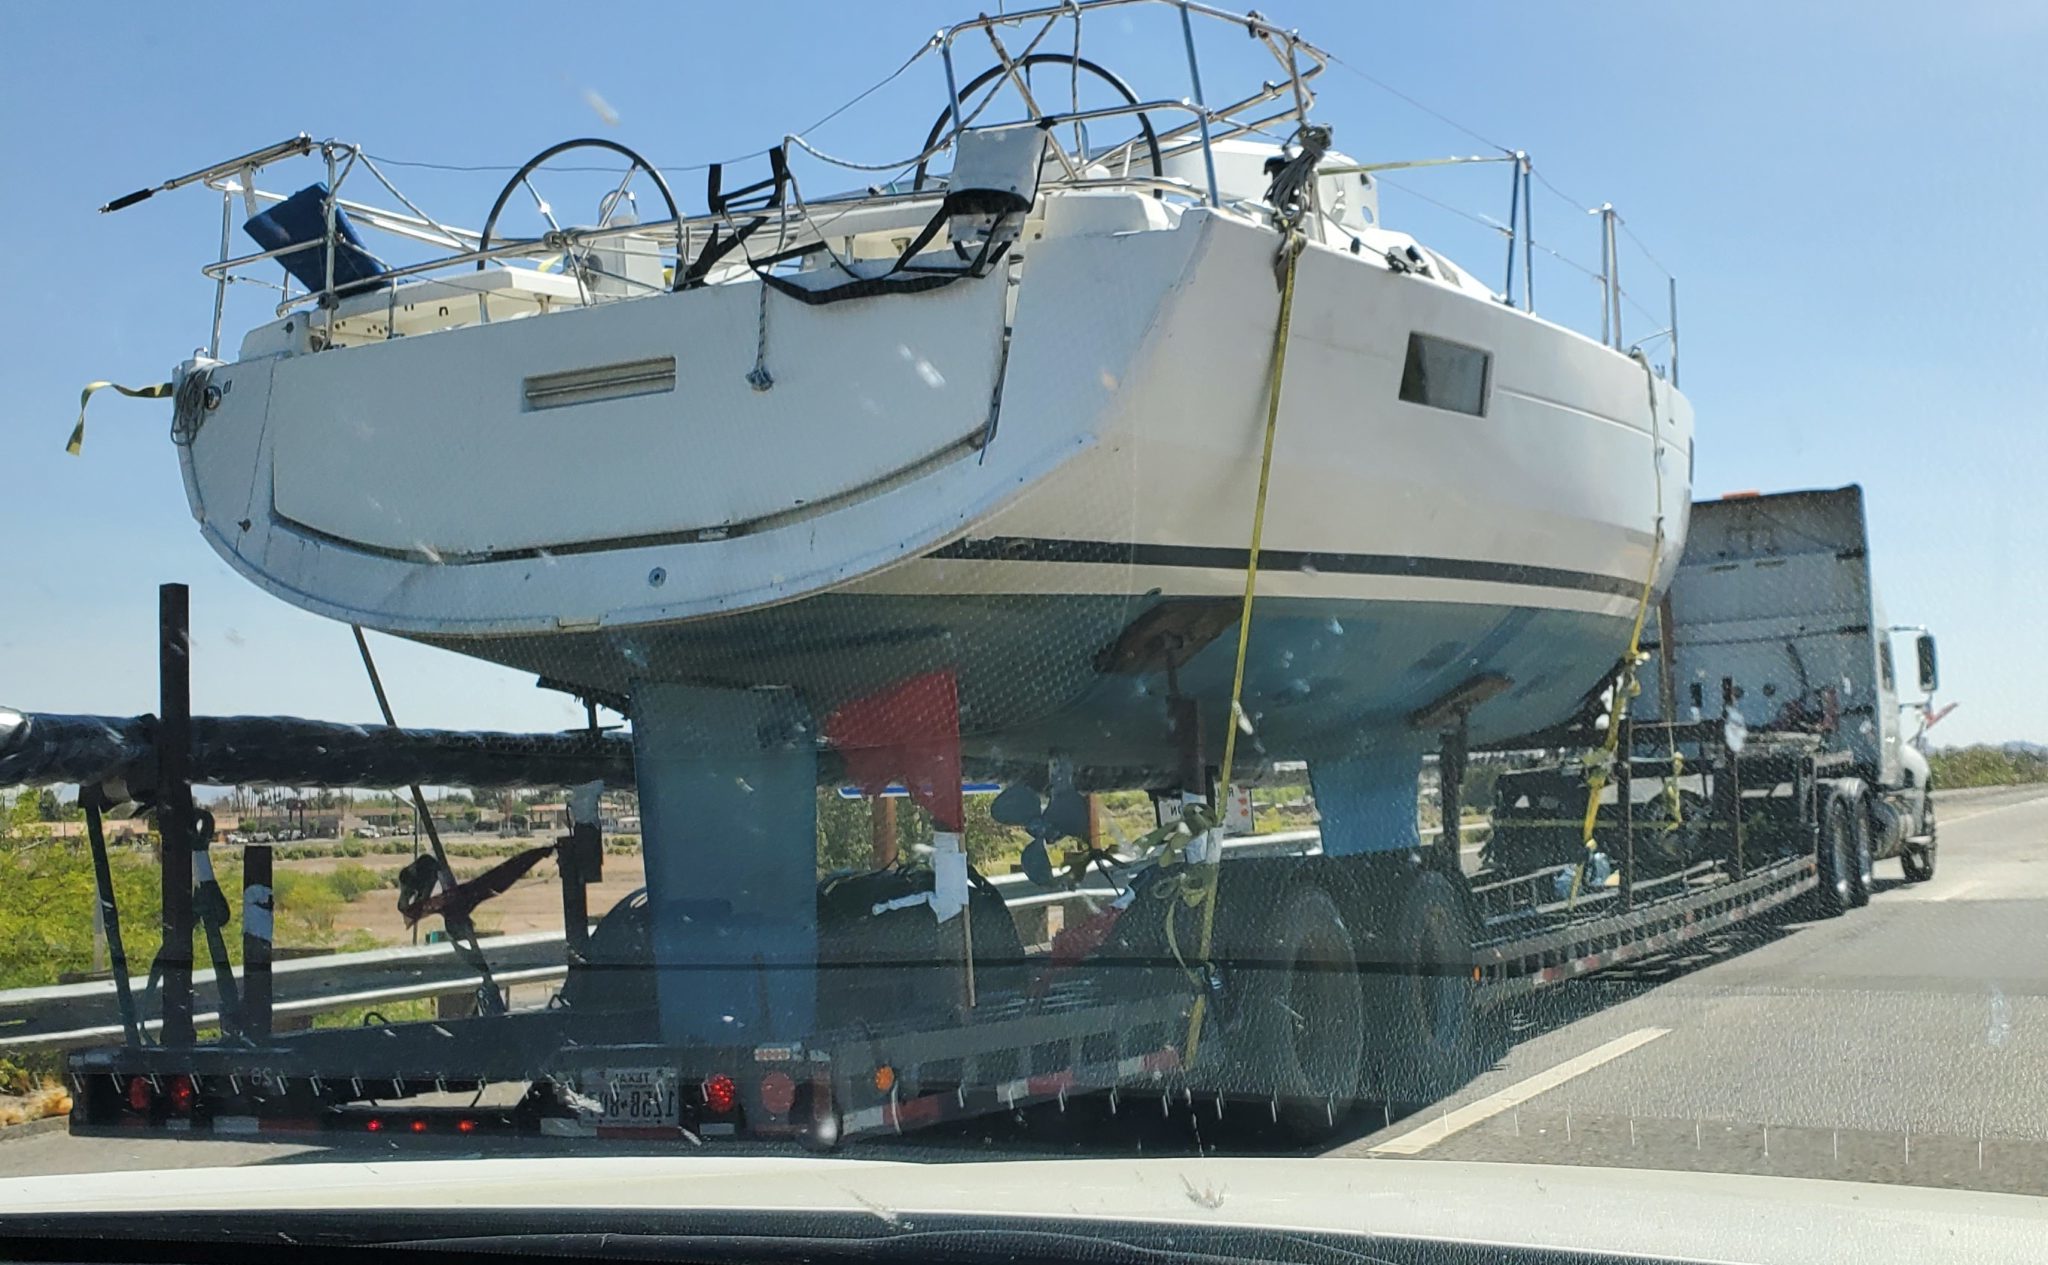 Boat for shipping